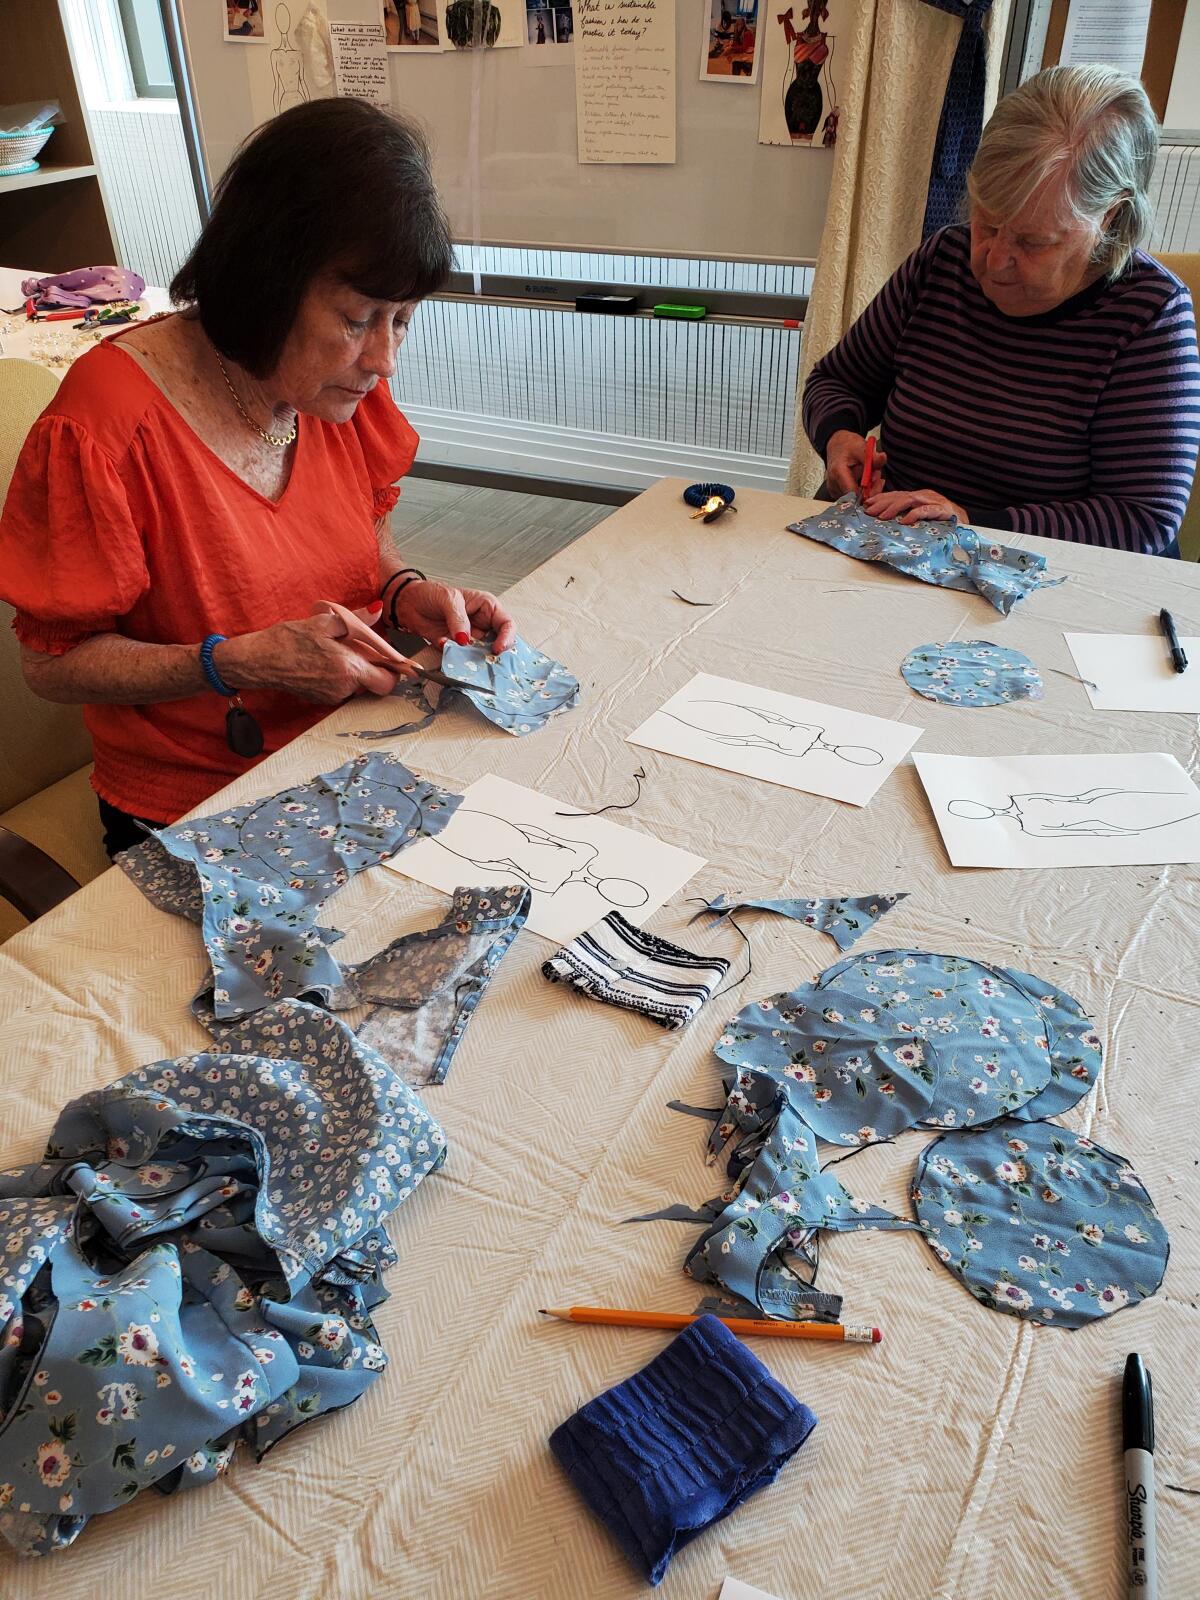 Mornie Wolfson and Jan Canty cut fabric from a shirt into circles that will be made into rosettes and sewn onto a hat.